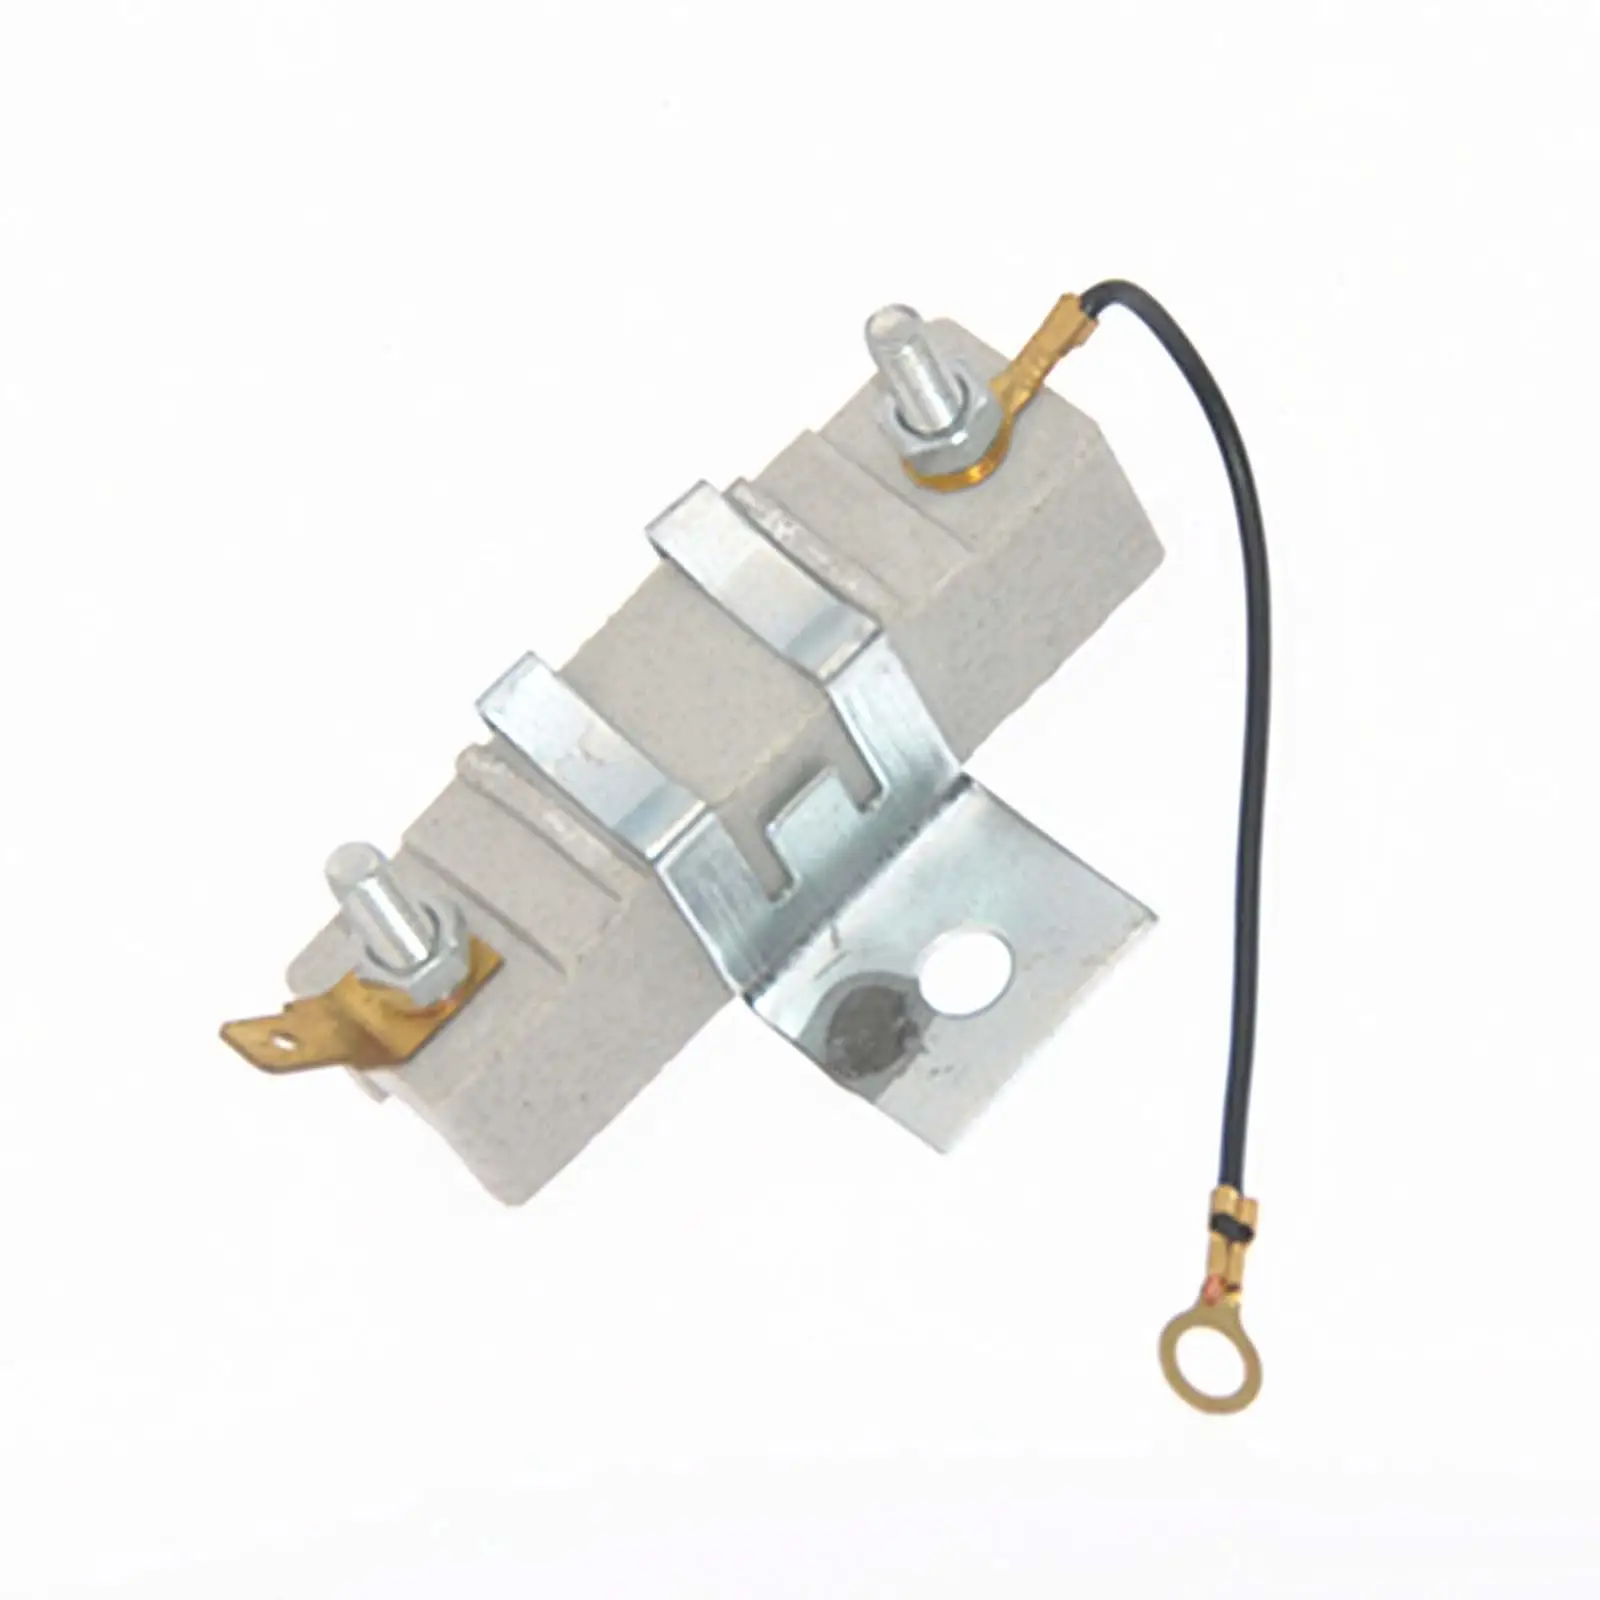 Ignition Coil External Ballast Resistor Premium for 1.5 Ohm Classic Car late 1960S-Mid 1980S